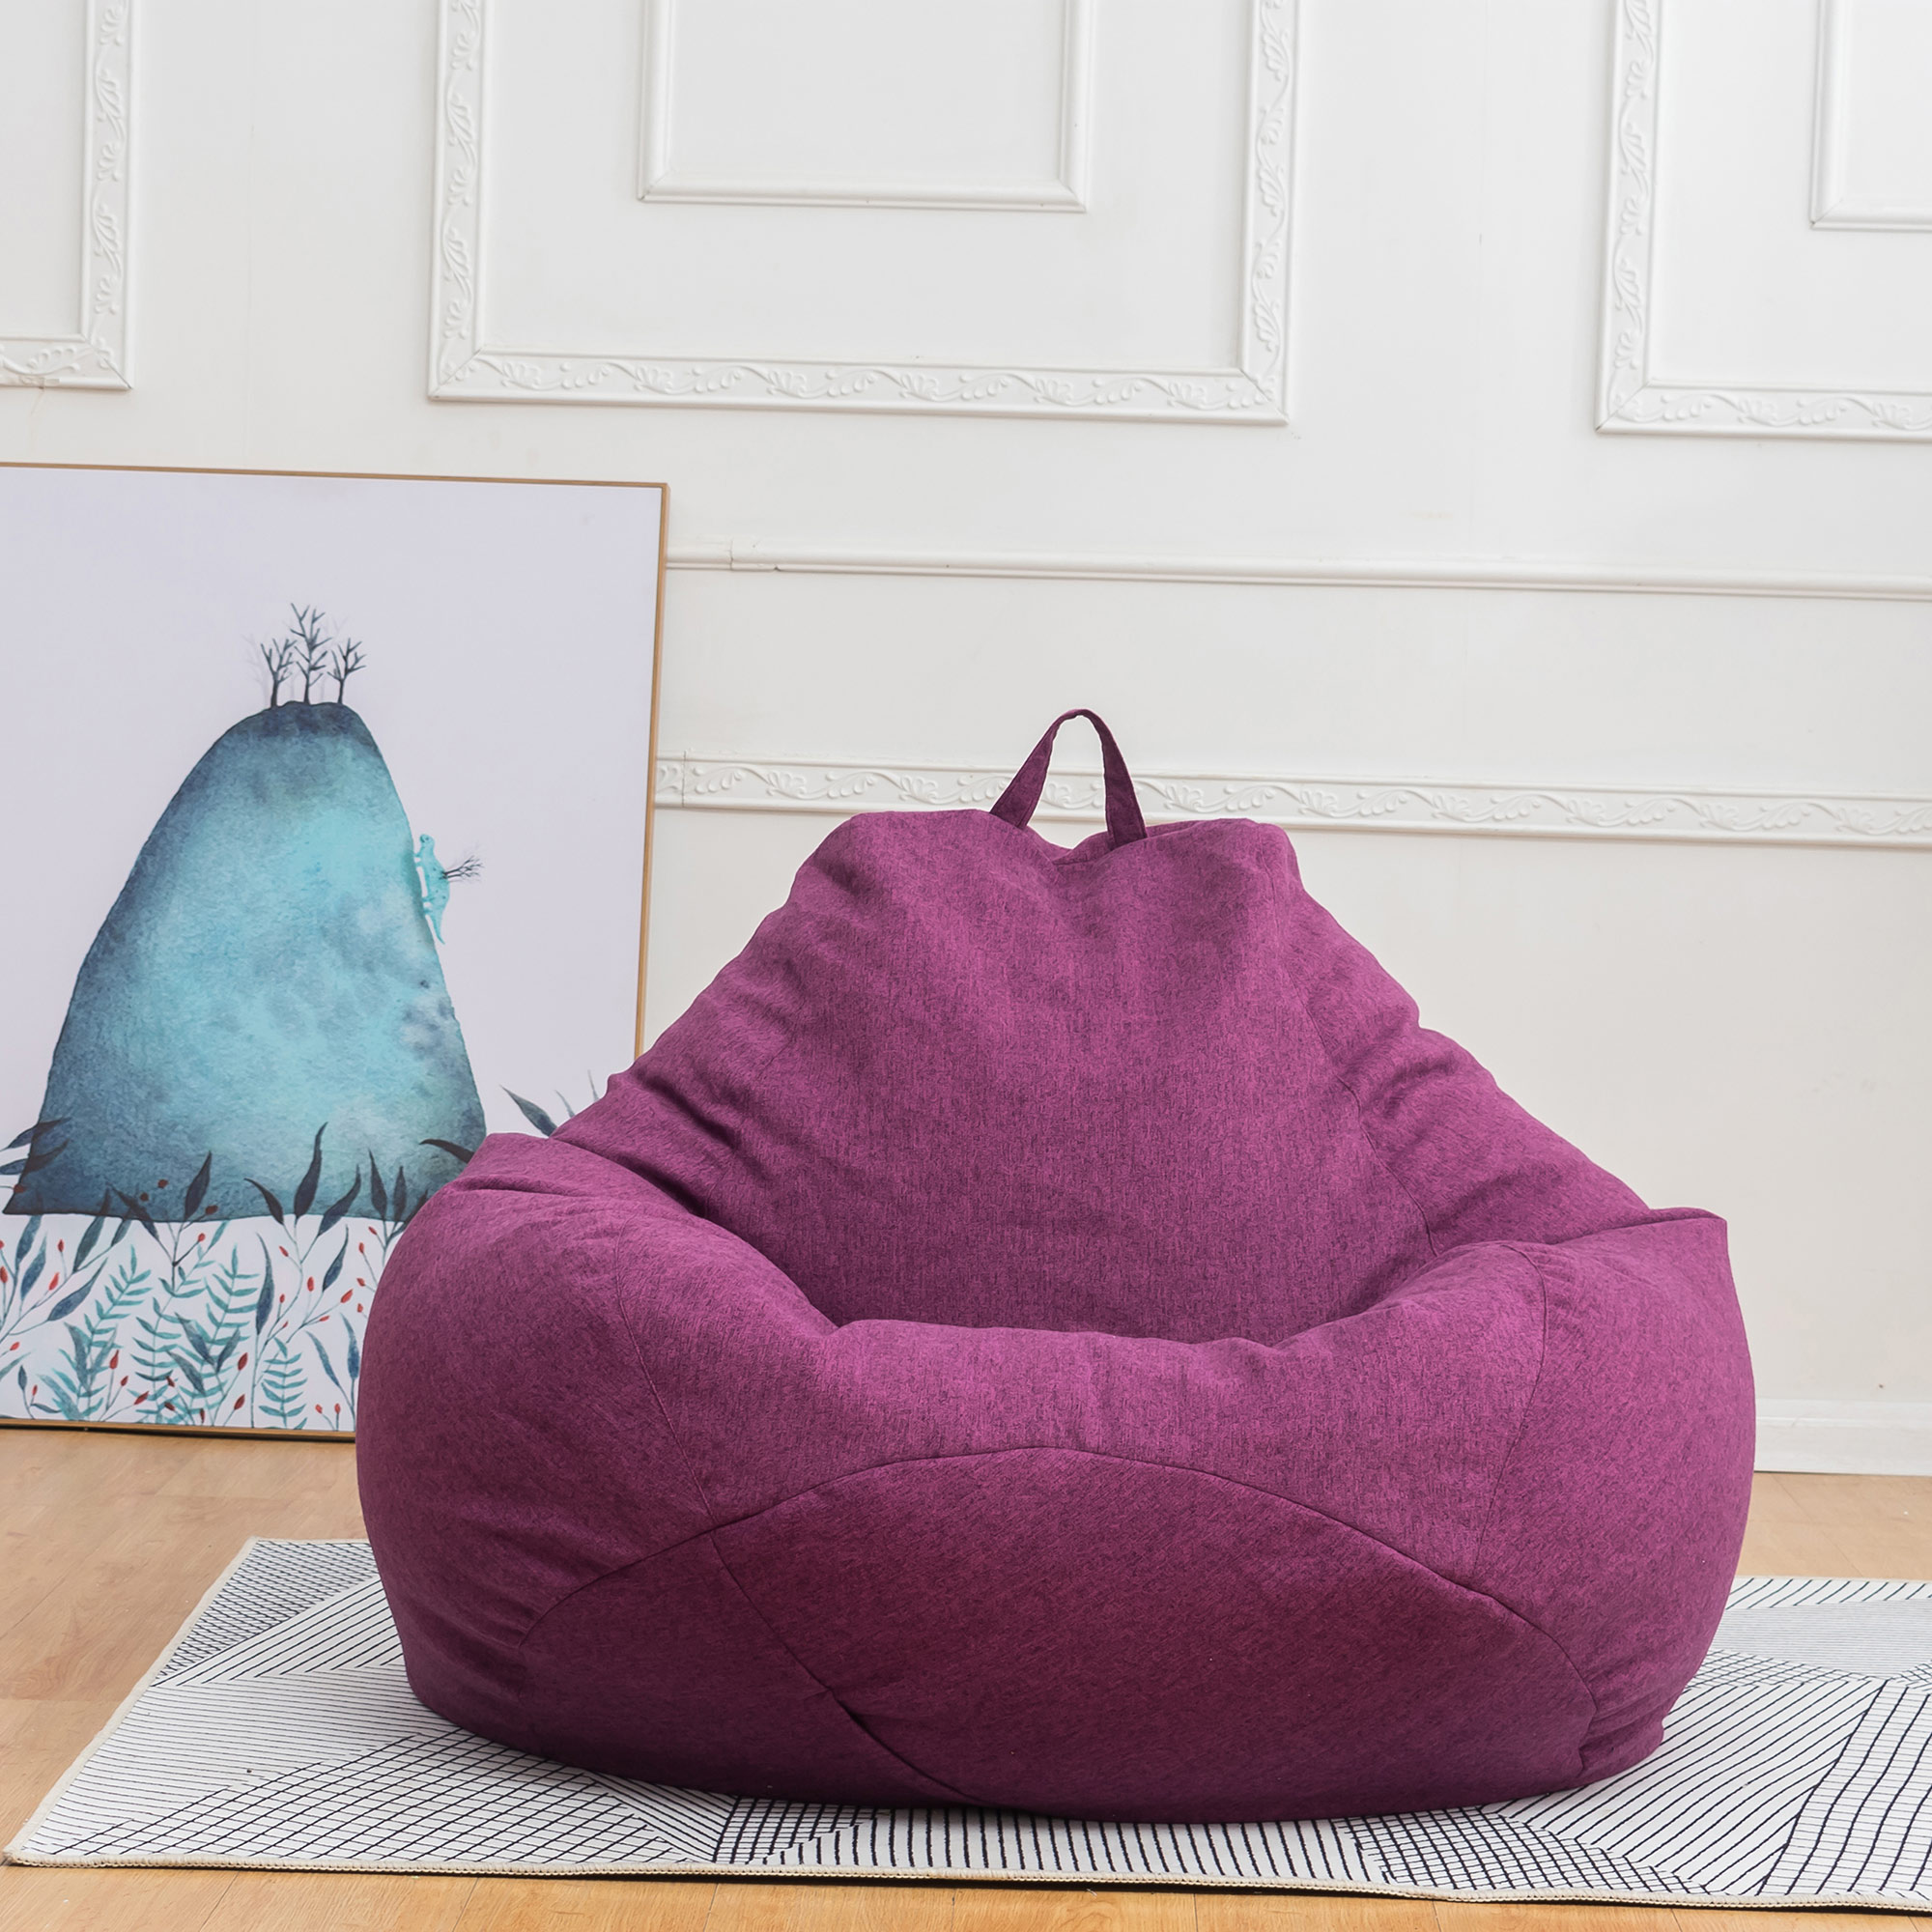 Bean Bag Chair Cover, Sofa Cover Beanbag Chair Cover Perfect for Reading, Alternative Seating Cover for Adults and Kids Cotton Linen Bean Bag Storage Chair Cover without Filling - image 1 of 7